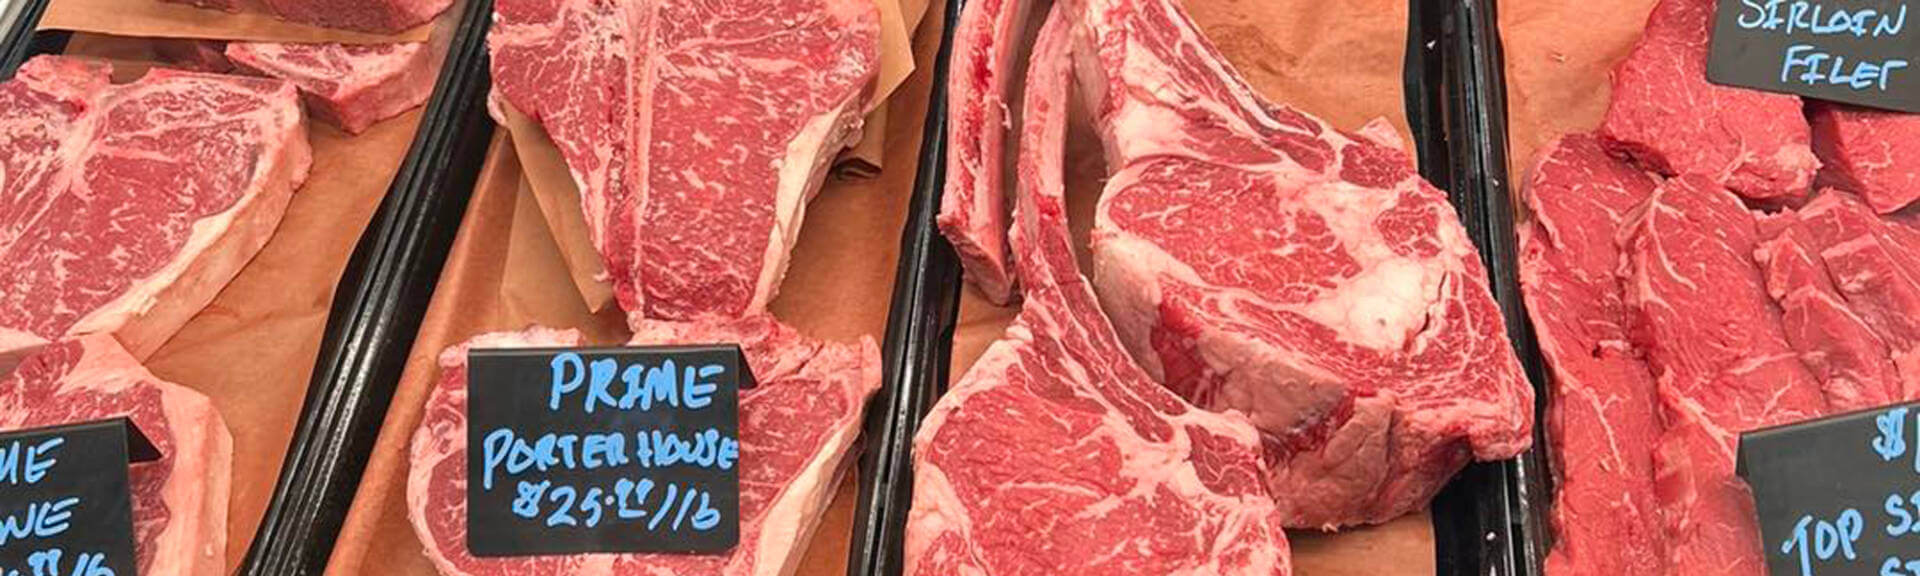 Close up photo of various cuts of meat including Prime Porterhouse in the butcher area